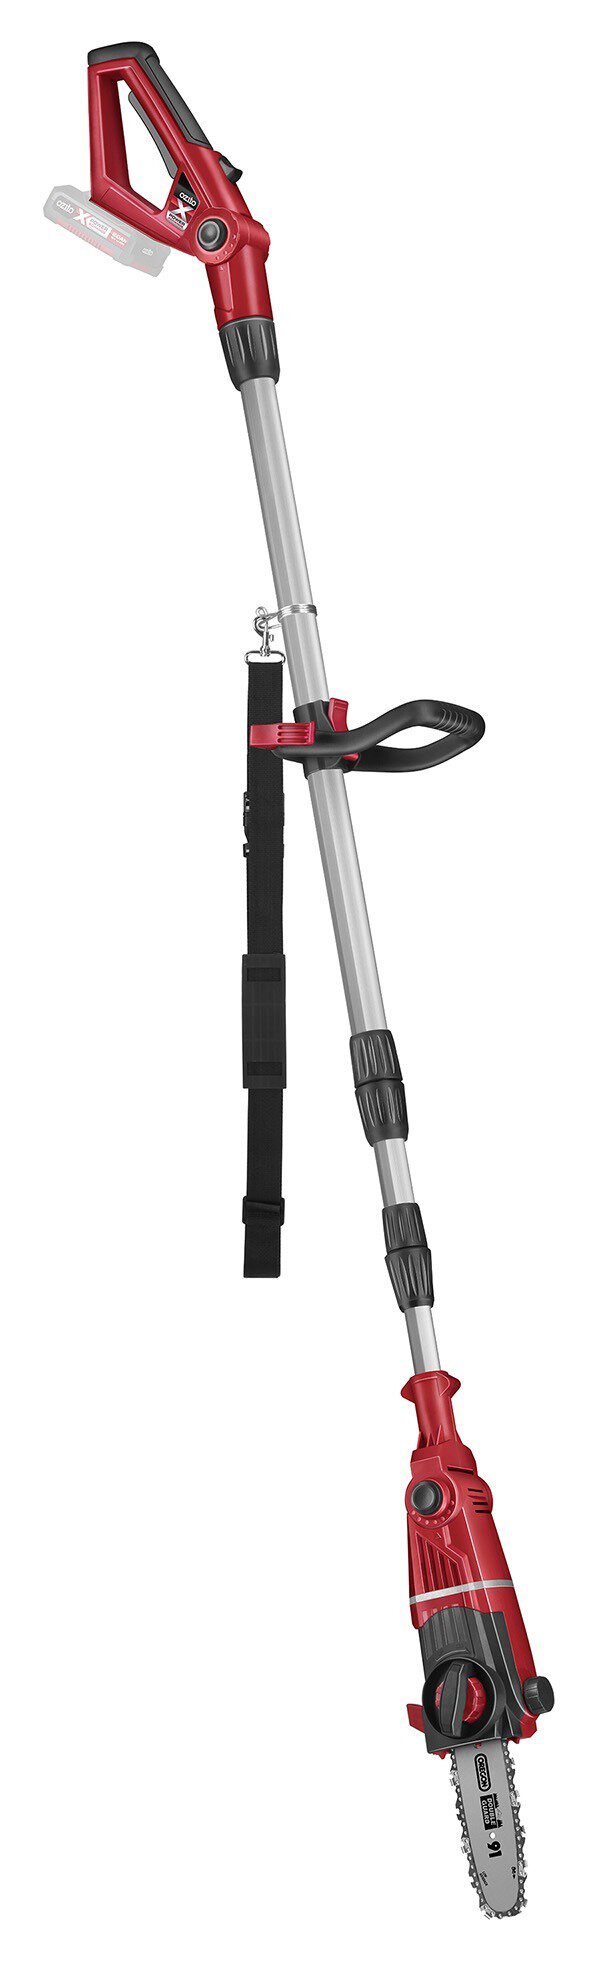 ozito-cl-pole-mounted-powered-pruner-3410813-productimage-101